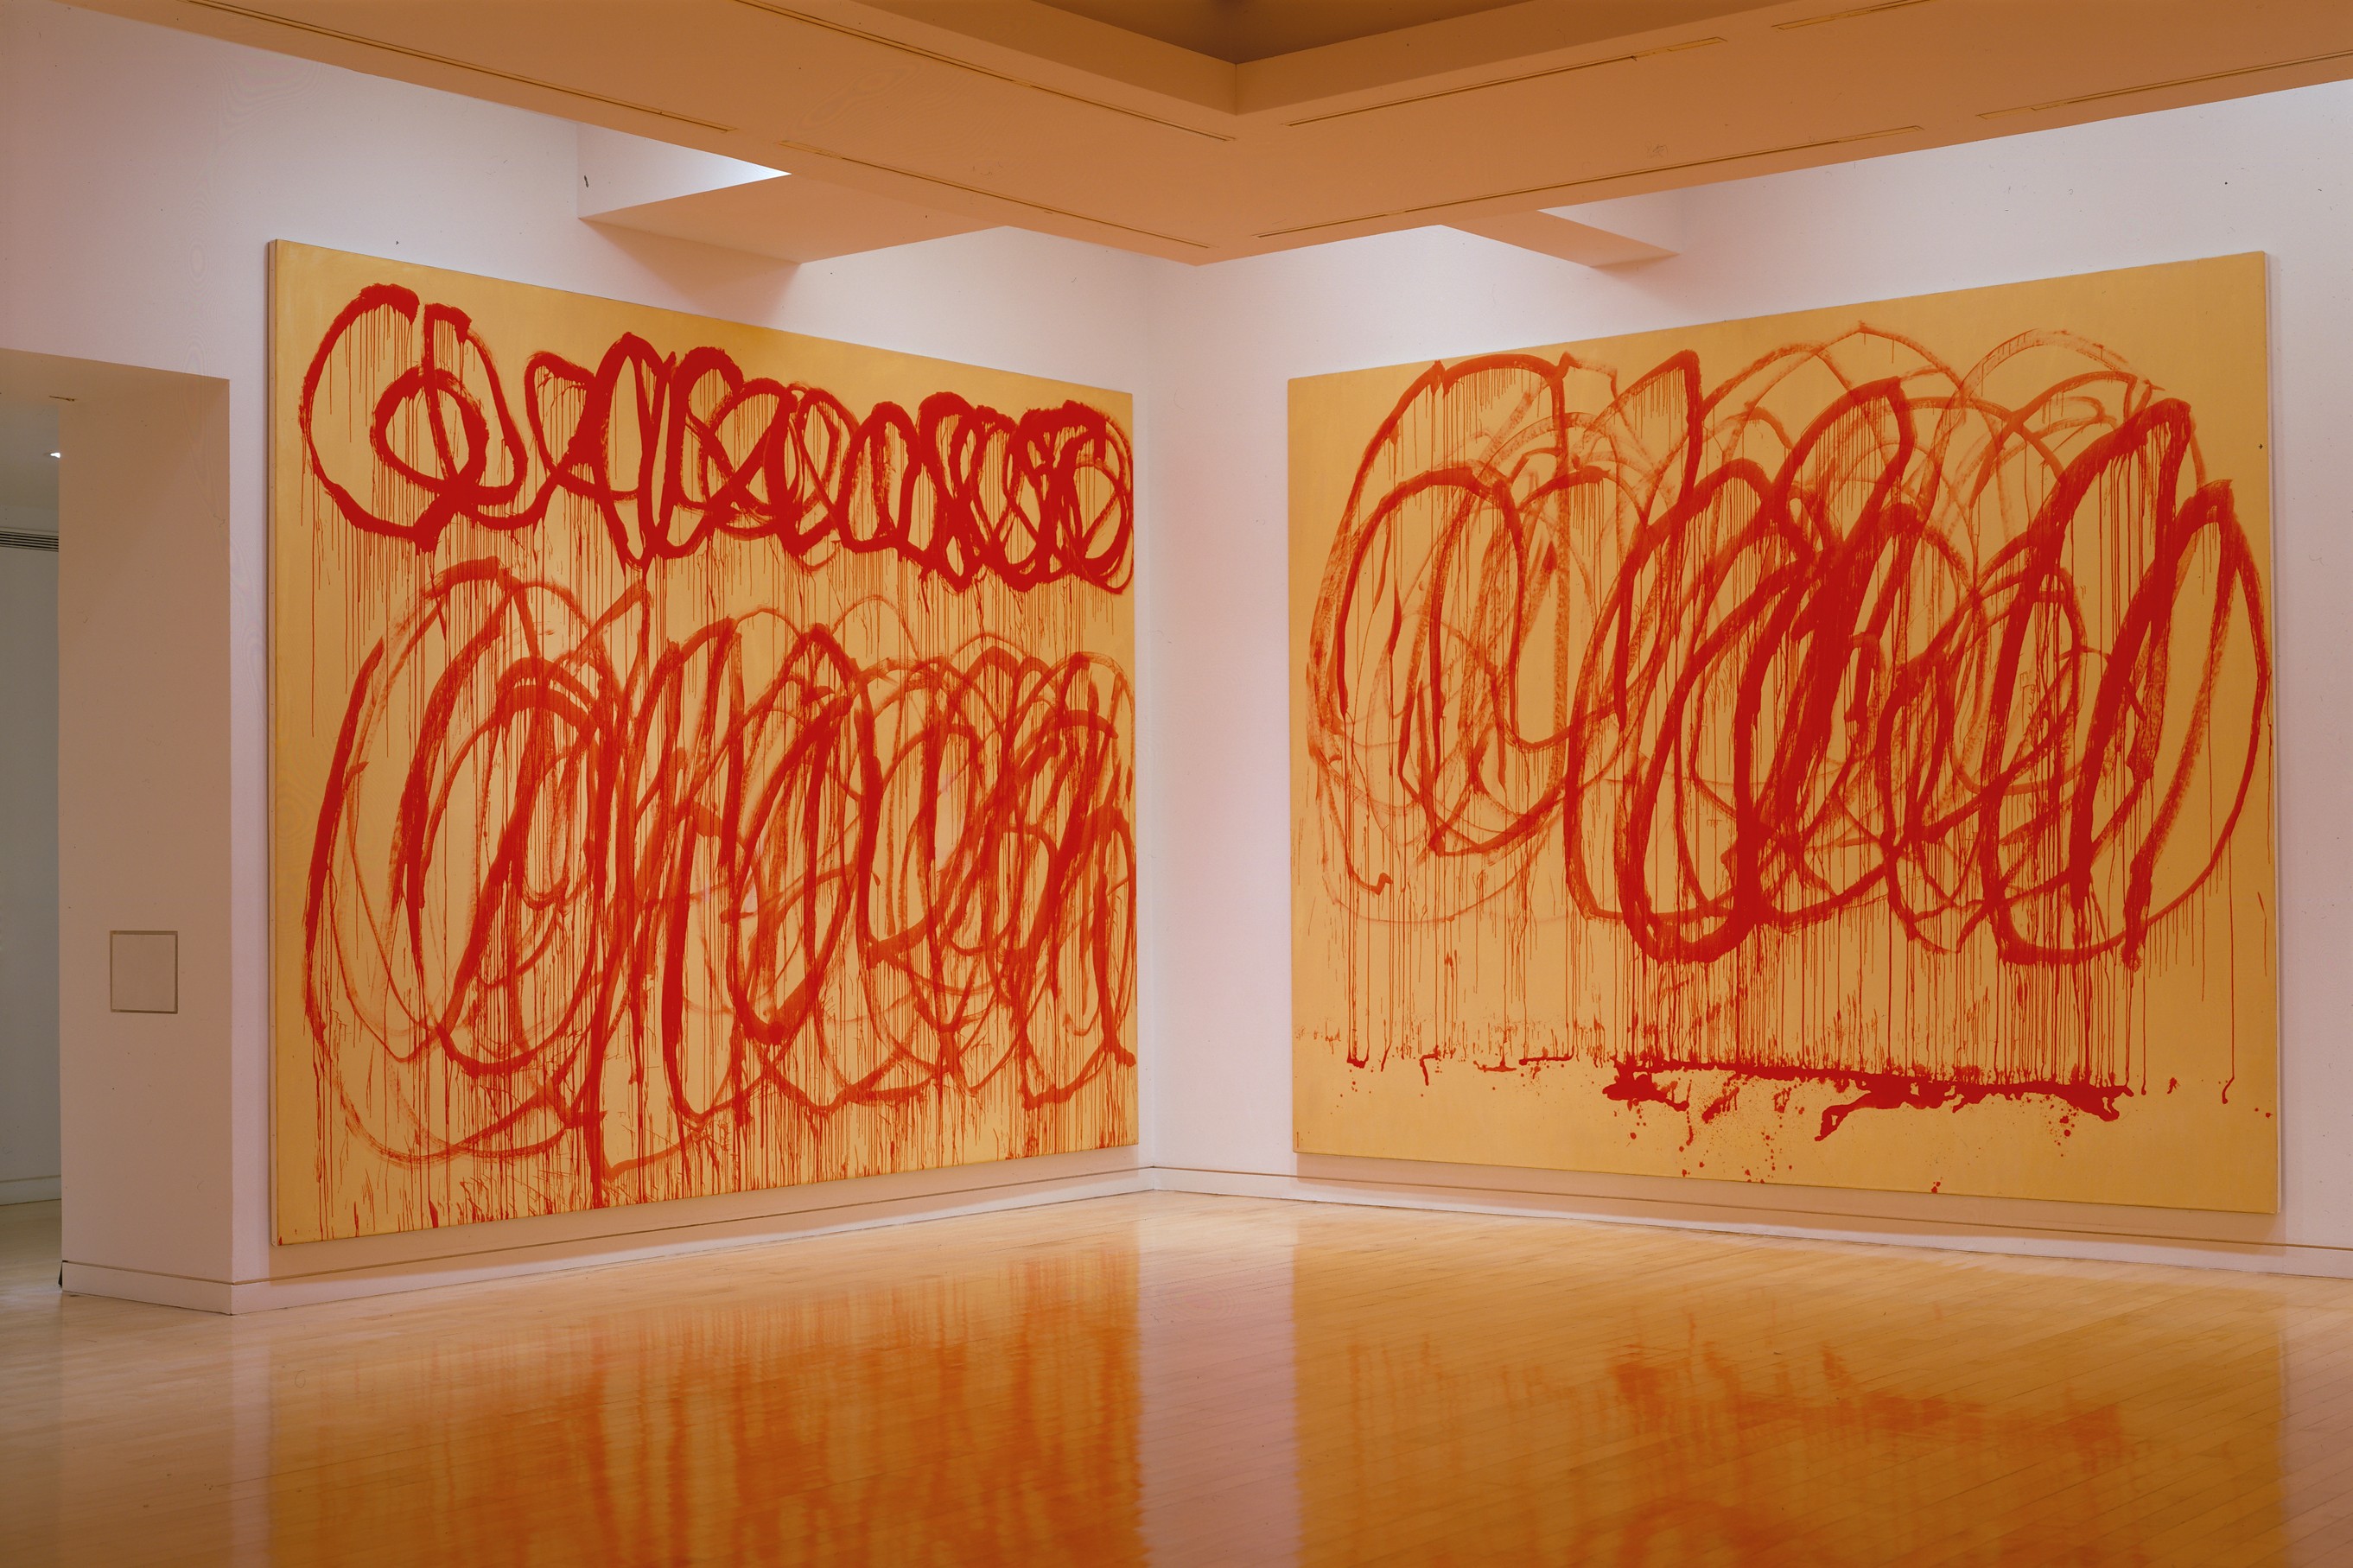 Cy Twombly: Bacchus, 980 Madison Avenue, New York, November 2 